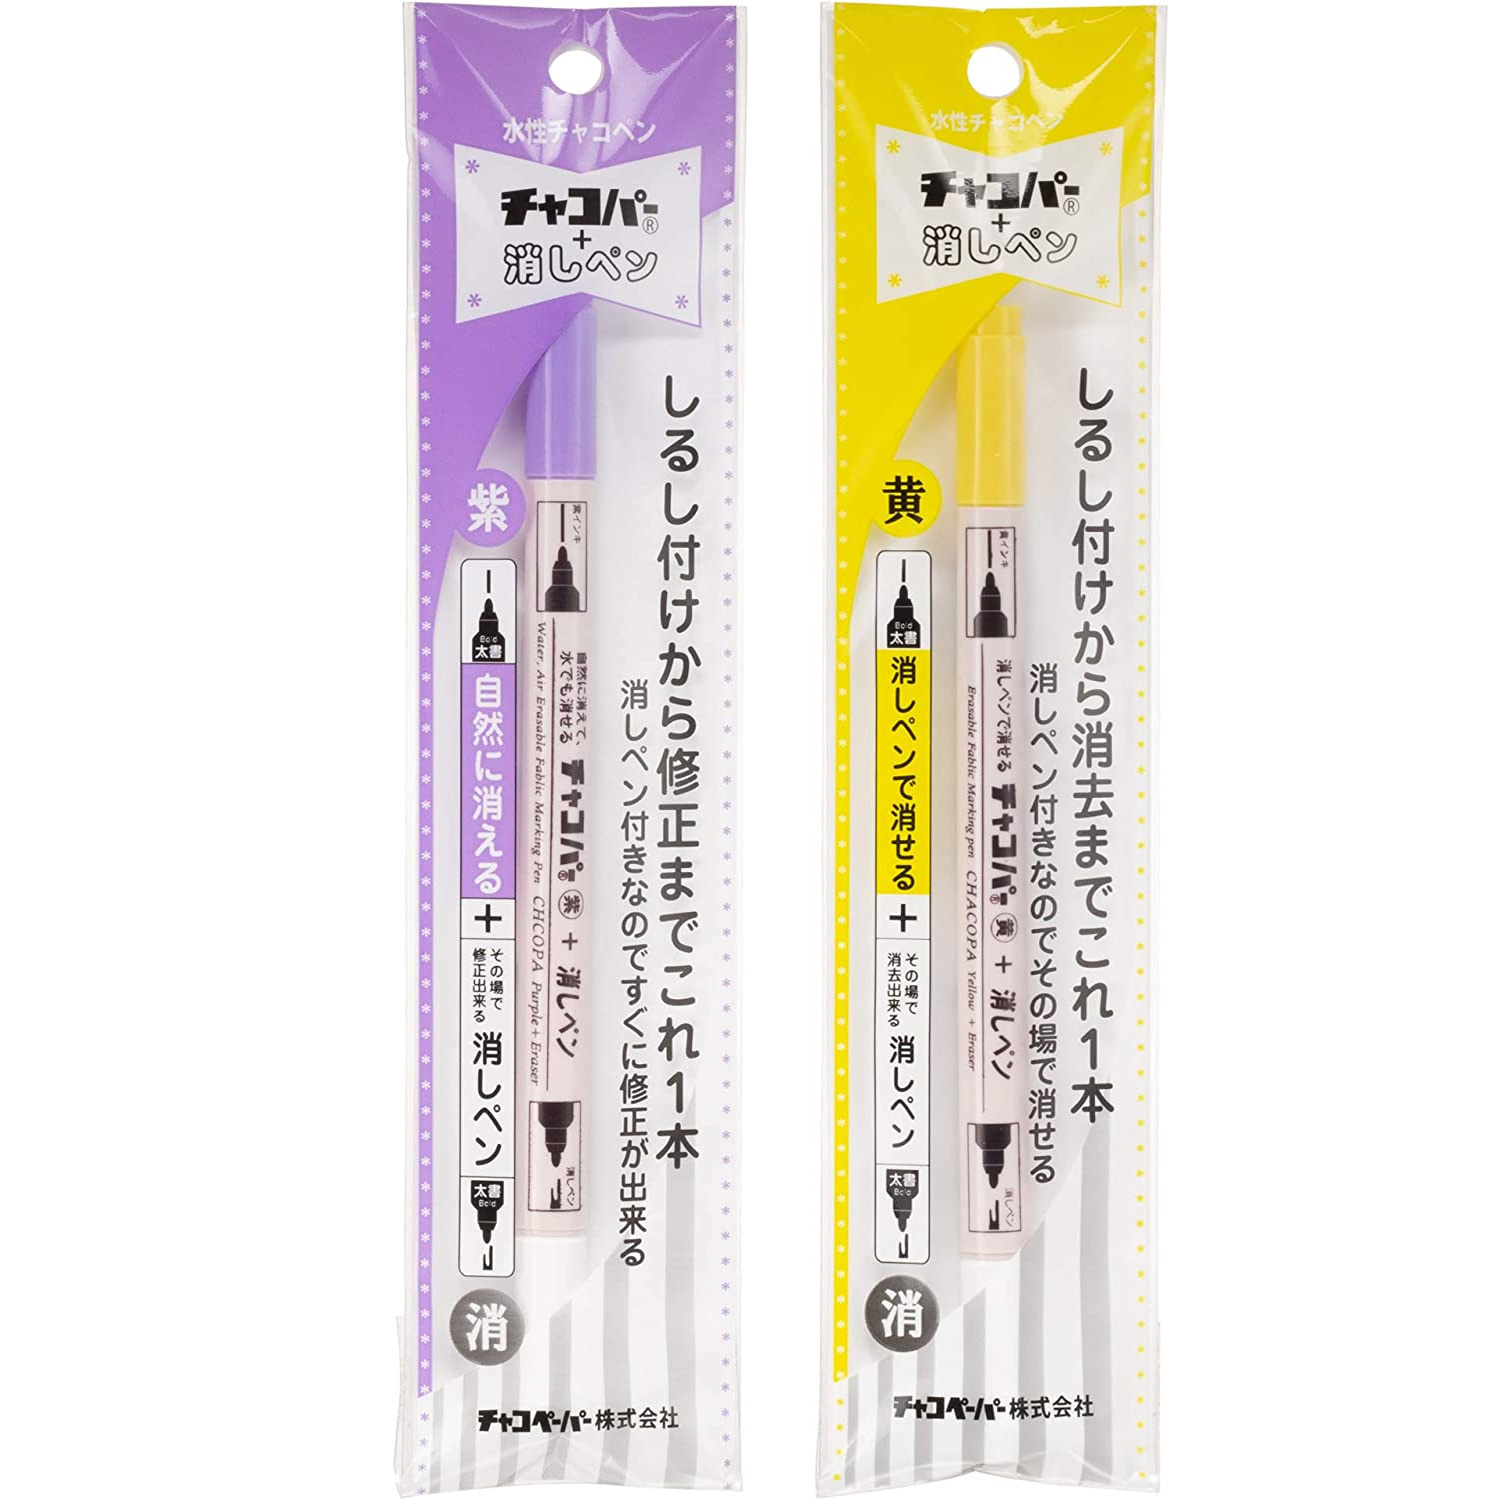 F11、12 Water-based Fabric Pen Chacopa + Eraser Length 16cm (pcs)